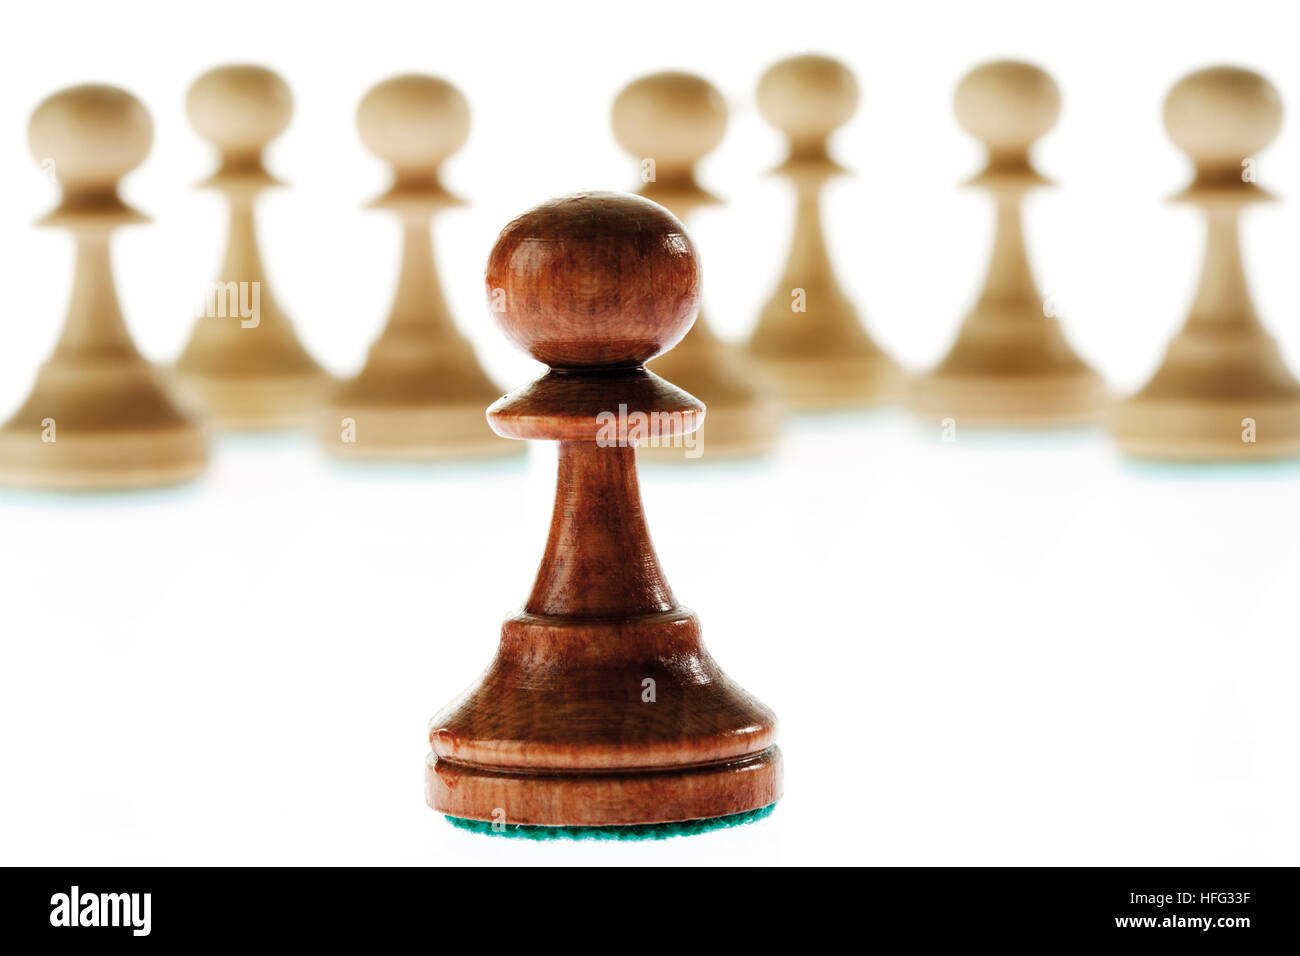 Chess pieces: single brown pawn standing apart from many white pawns Stock Photo